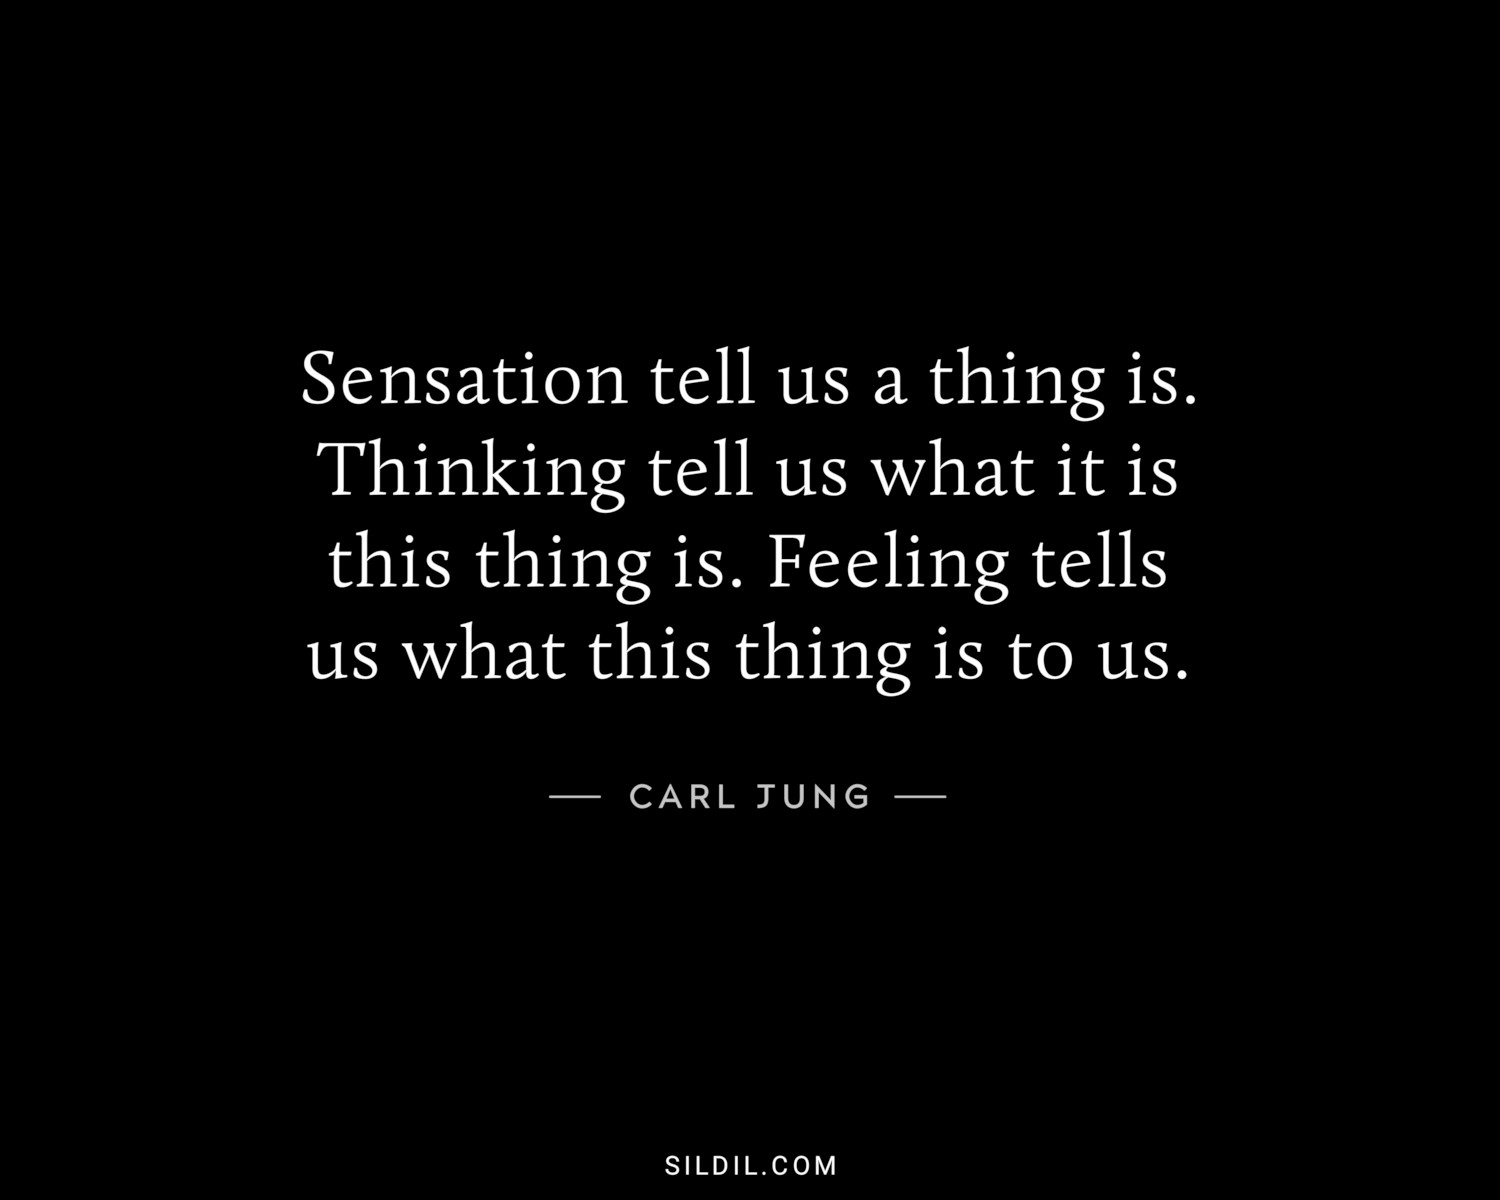 Sensation tell us a thing is. Thinking tell us what it is this thing is. Feeling tells us what this thing is to us.